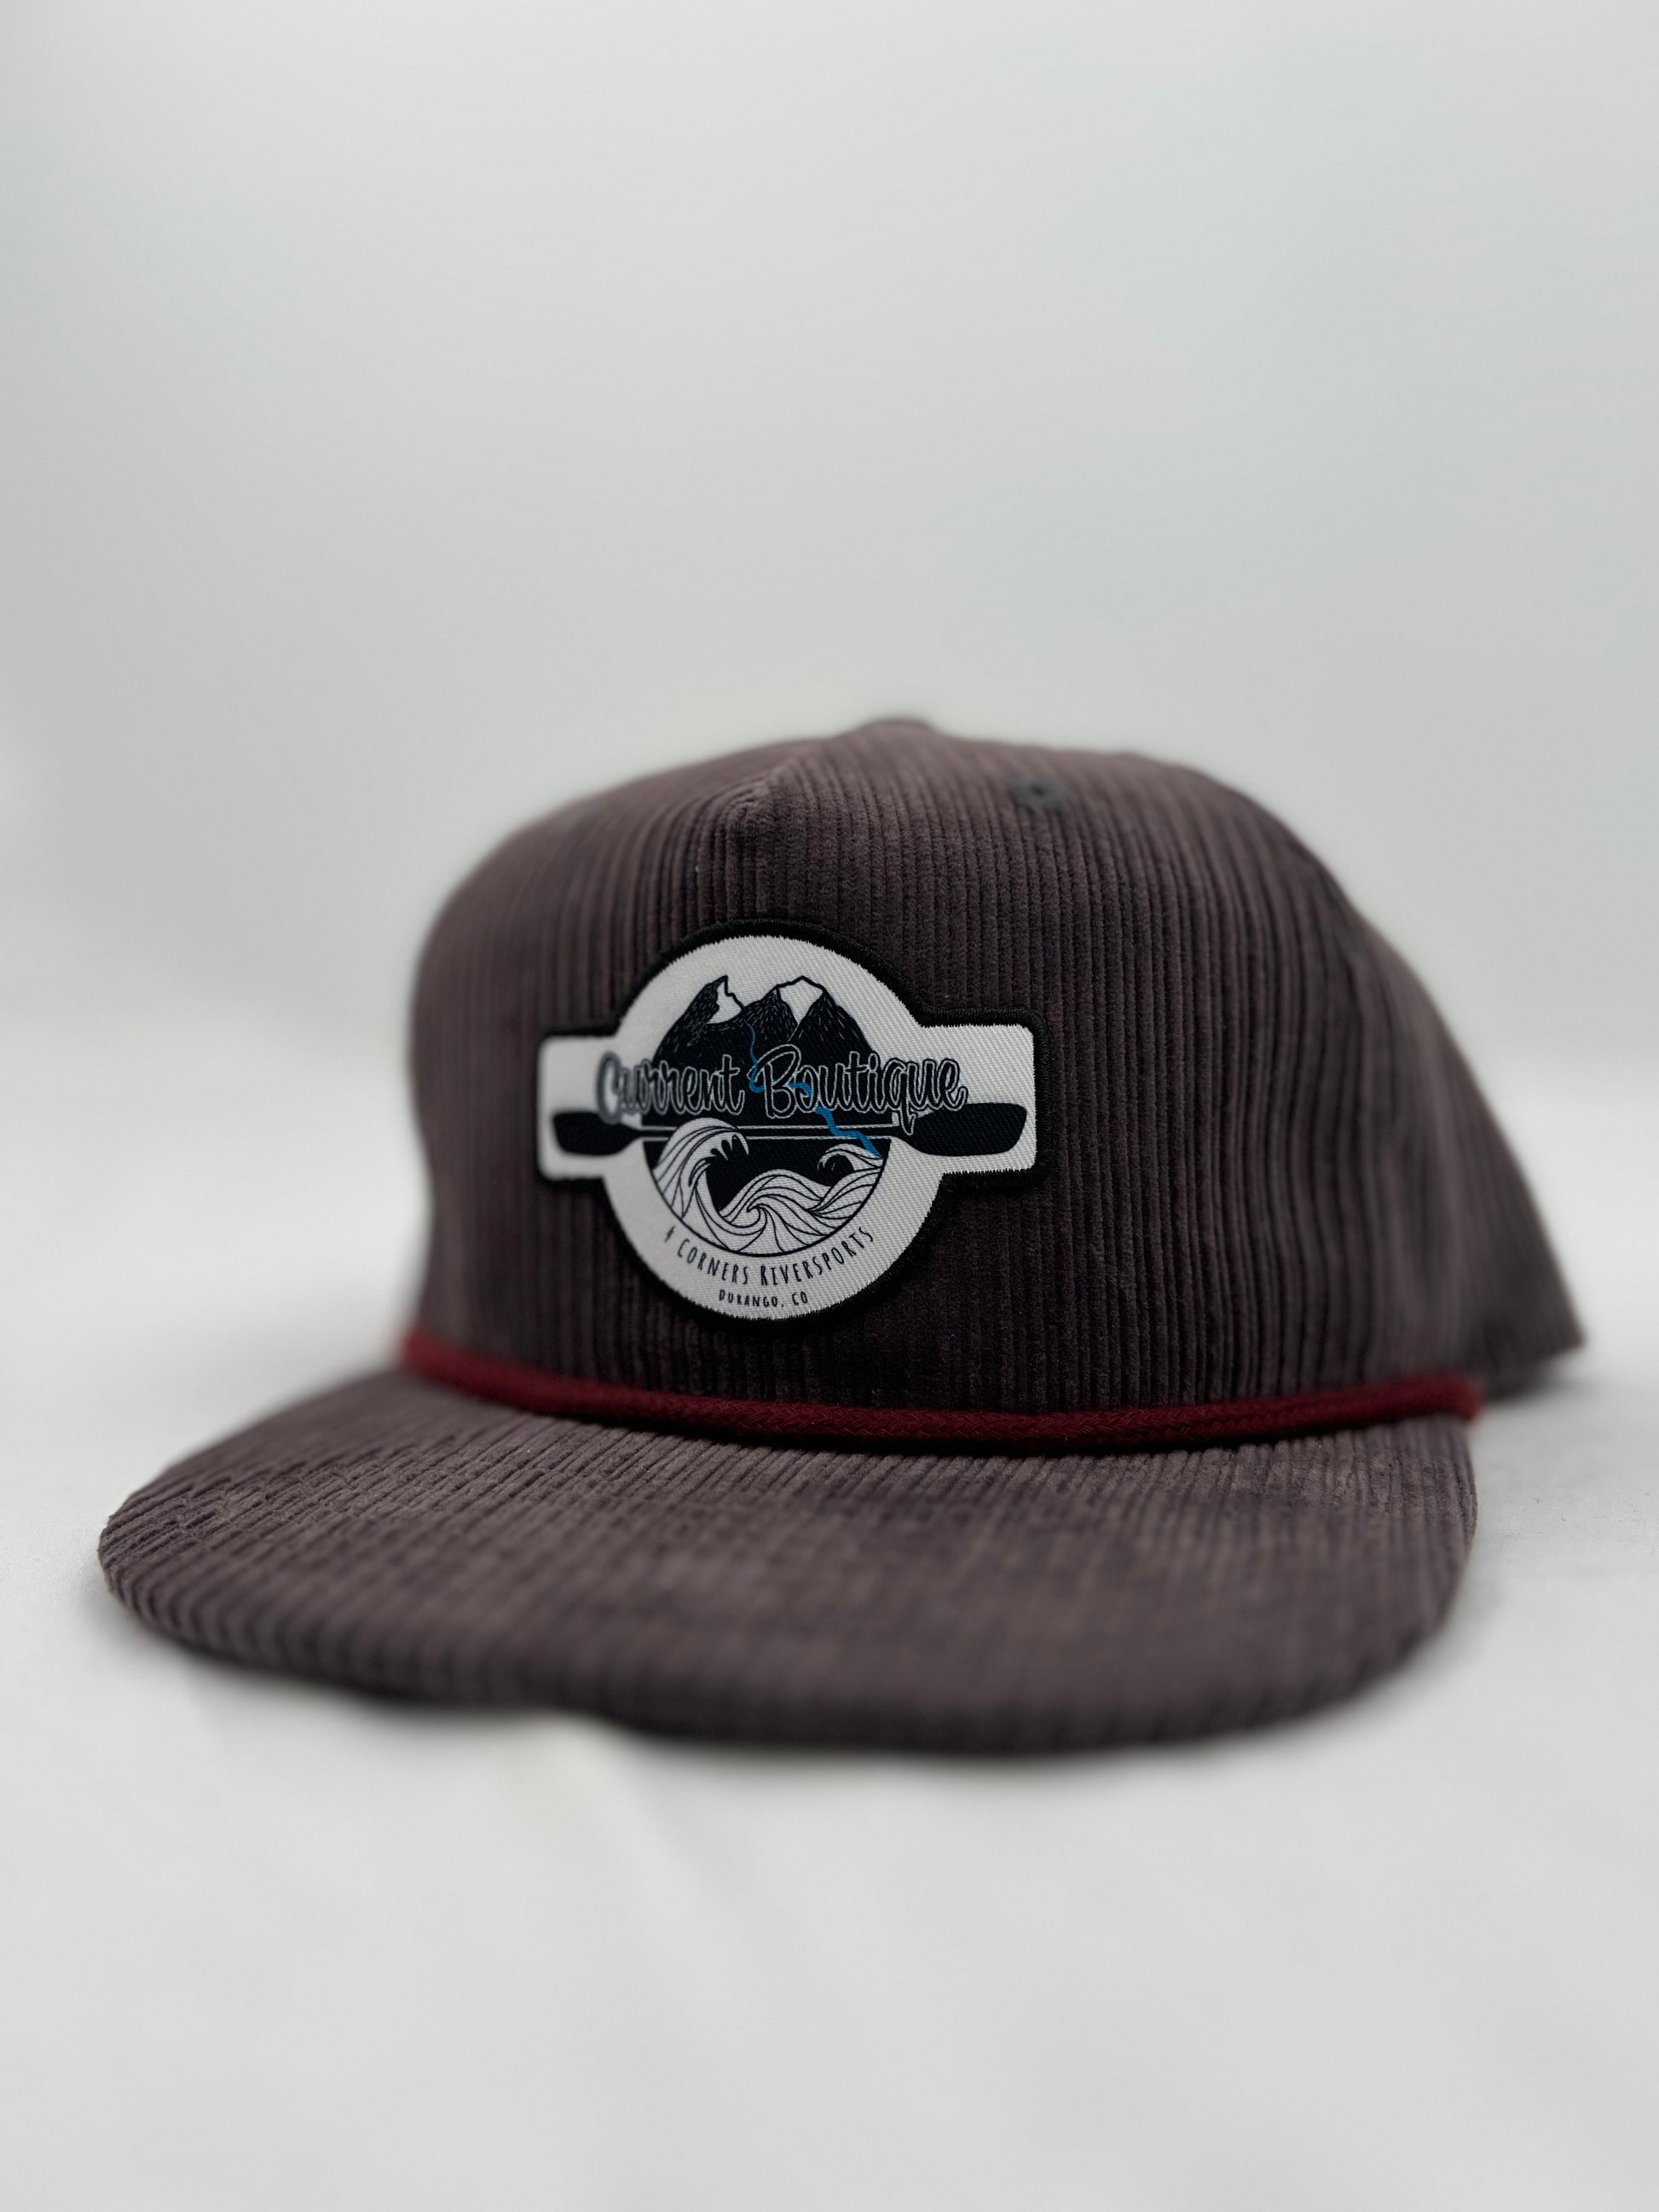 A brown corduroy snapback hat with an embroidered Captuer Headwear logo patch.